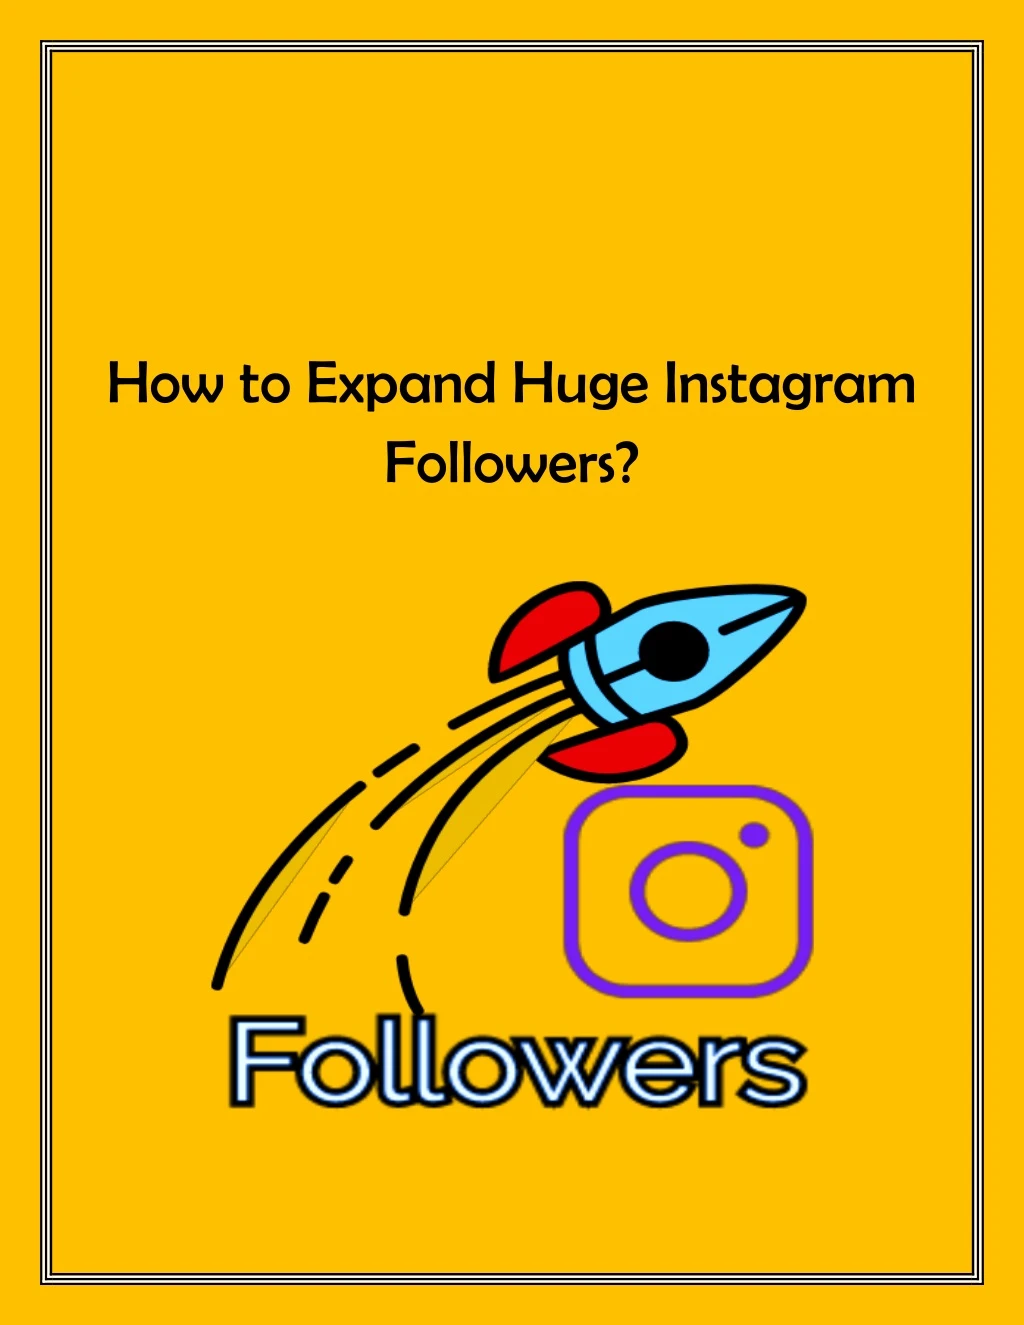 how to expand huge instagram followers